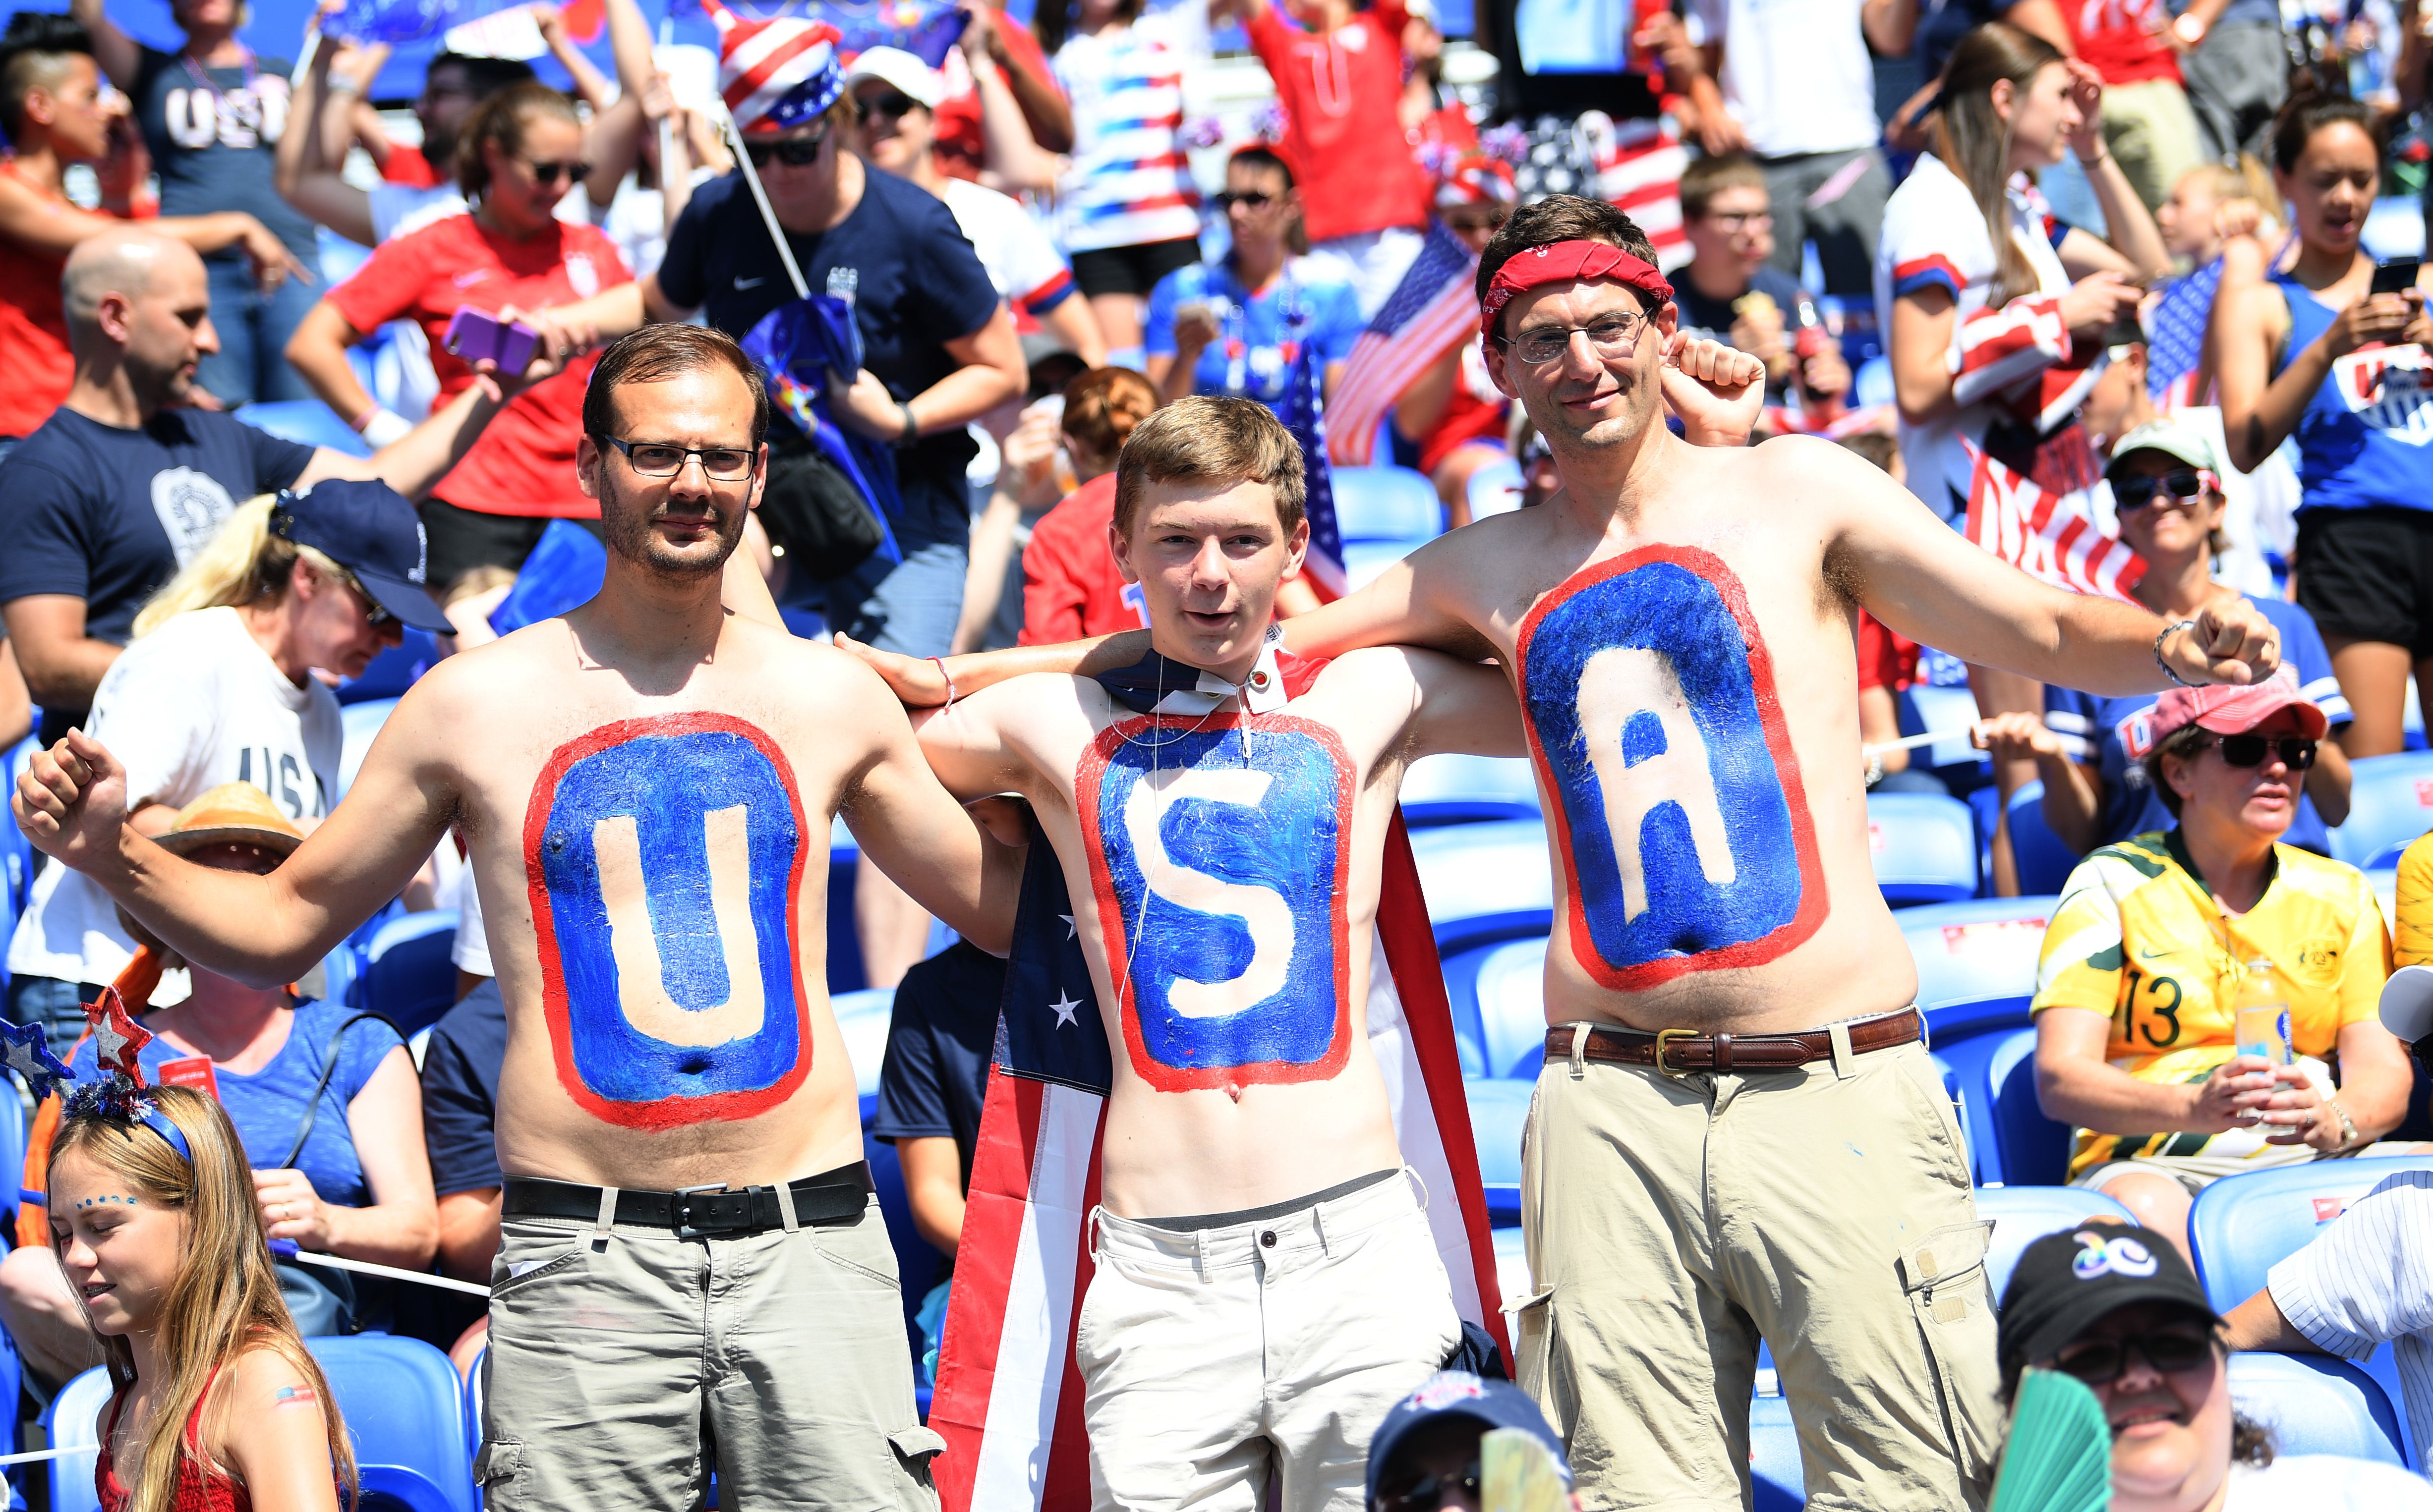 U.S. fans show their support with "USA" body paint.